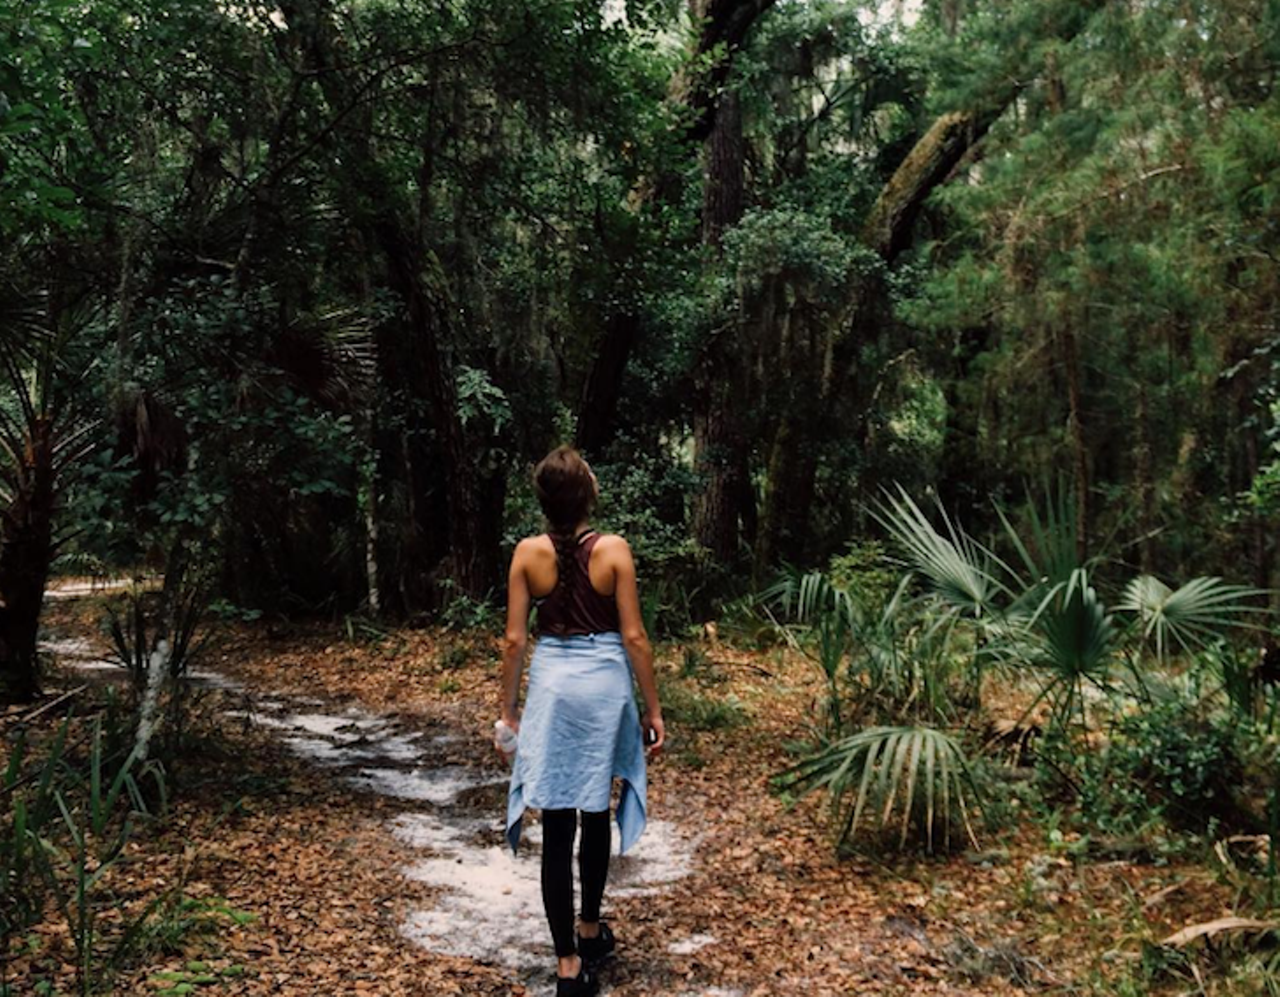 Econ River Wilderness
3795 Old Lockwood Road, Oviedo, FL 32765
Tucked away between strip malls and gated communities in the Orlando suburbs, this trail offers a chance to explore the wonders of Florida wildlife while meandering down a winding river.
Photo via ky.crate/Instagram